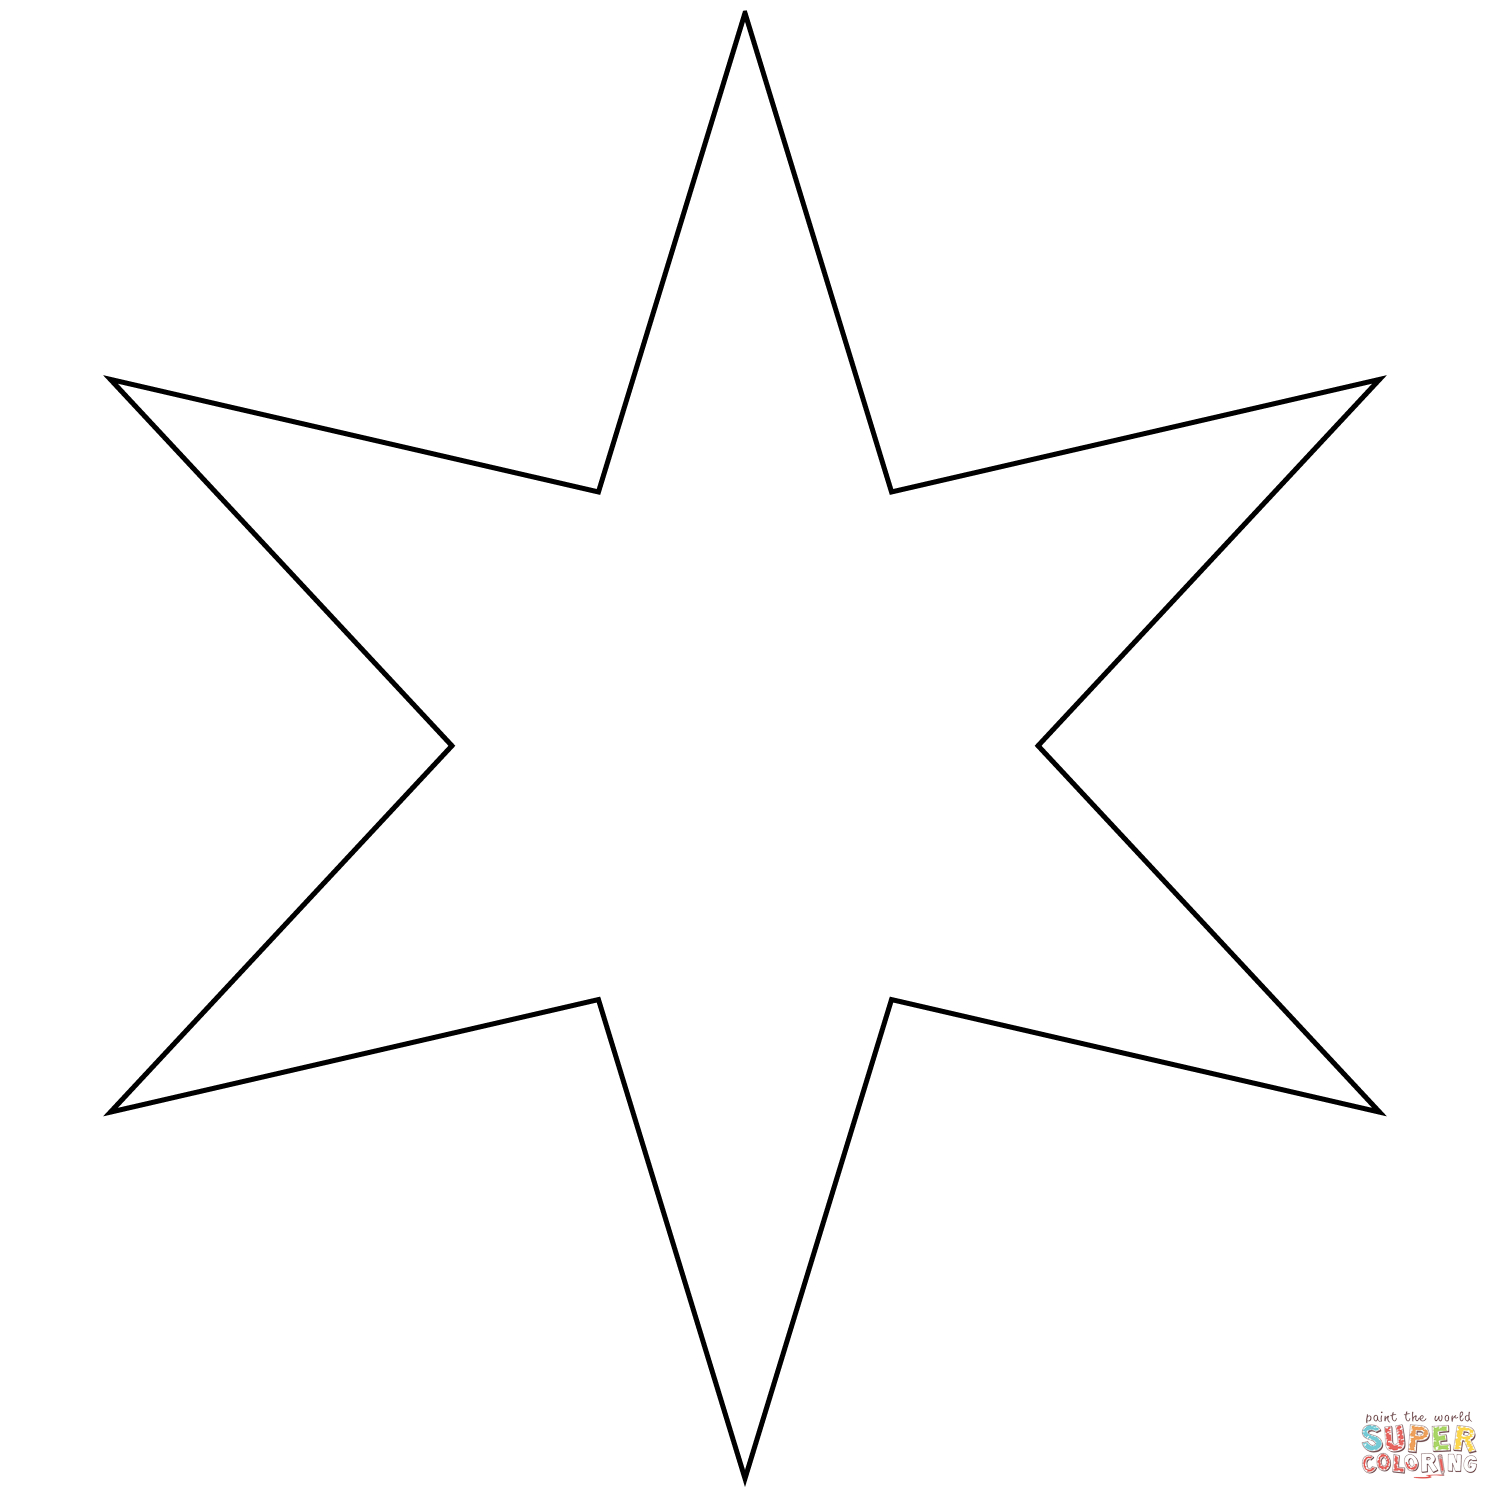 Six Pointed Star Coloring Page | Free Printable Coloring Pages - Star Of David Template Free Printable